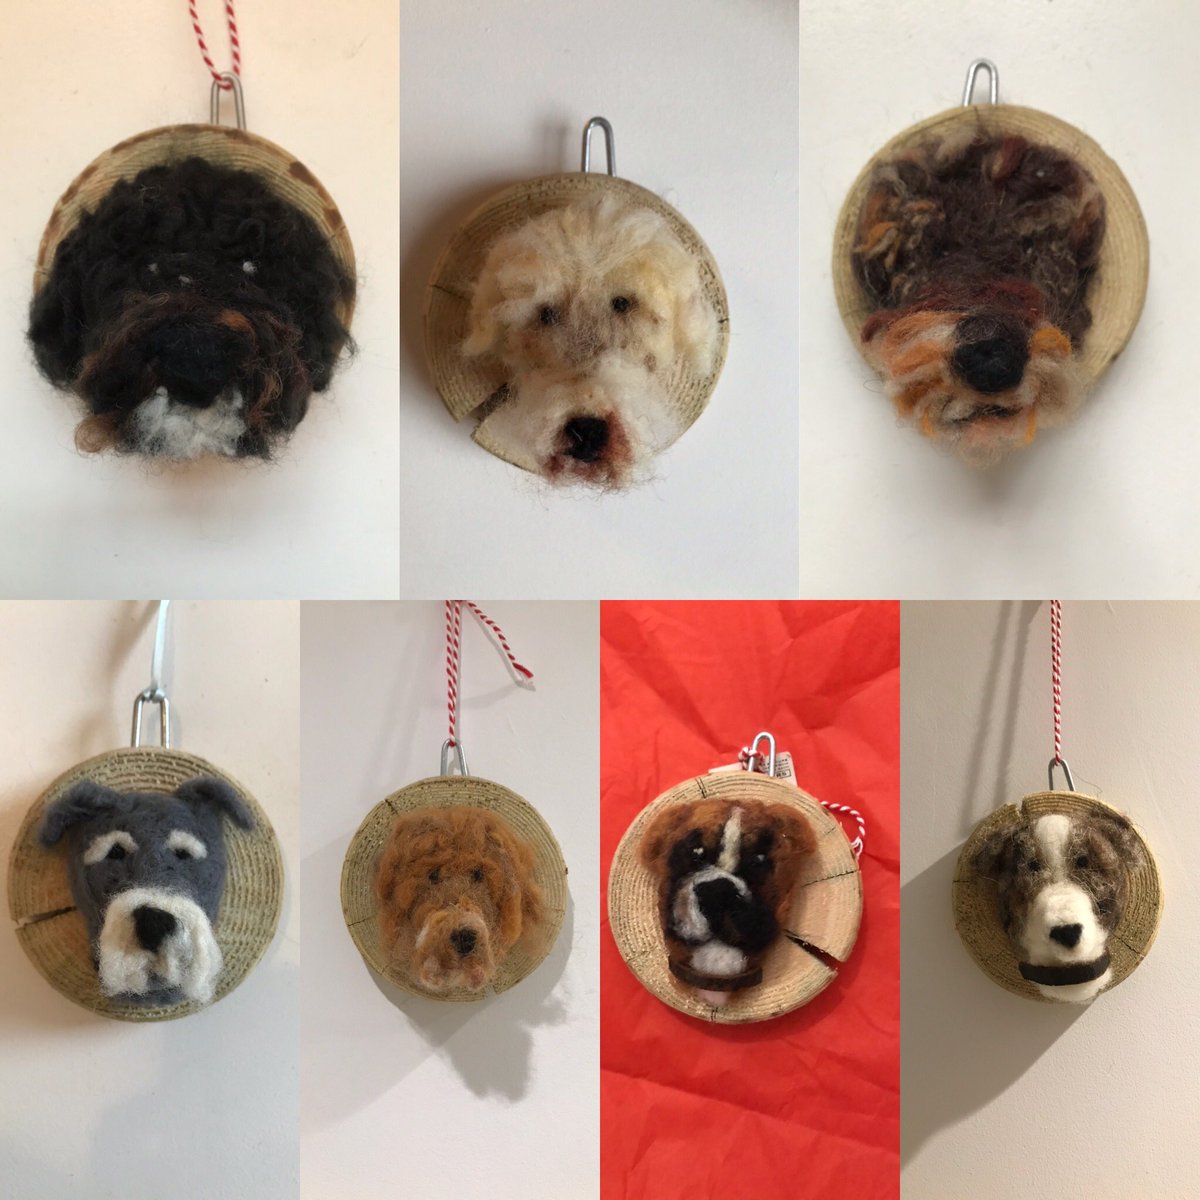 I can make a Needle felted version of your pet it would be 
£10 each plus £4.10 postage uk

Message for more information

#dog #dogs #dogsofinstagram #doglife #doglovers #dogstagram #doglove #doggo #pet #pets #petsofinstagram #commission #bespoke #etsy #etsyuk #etsyshop #etsysell